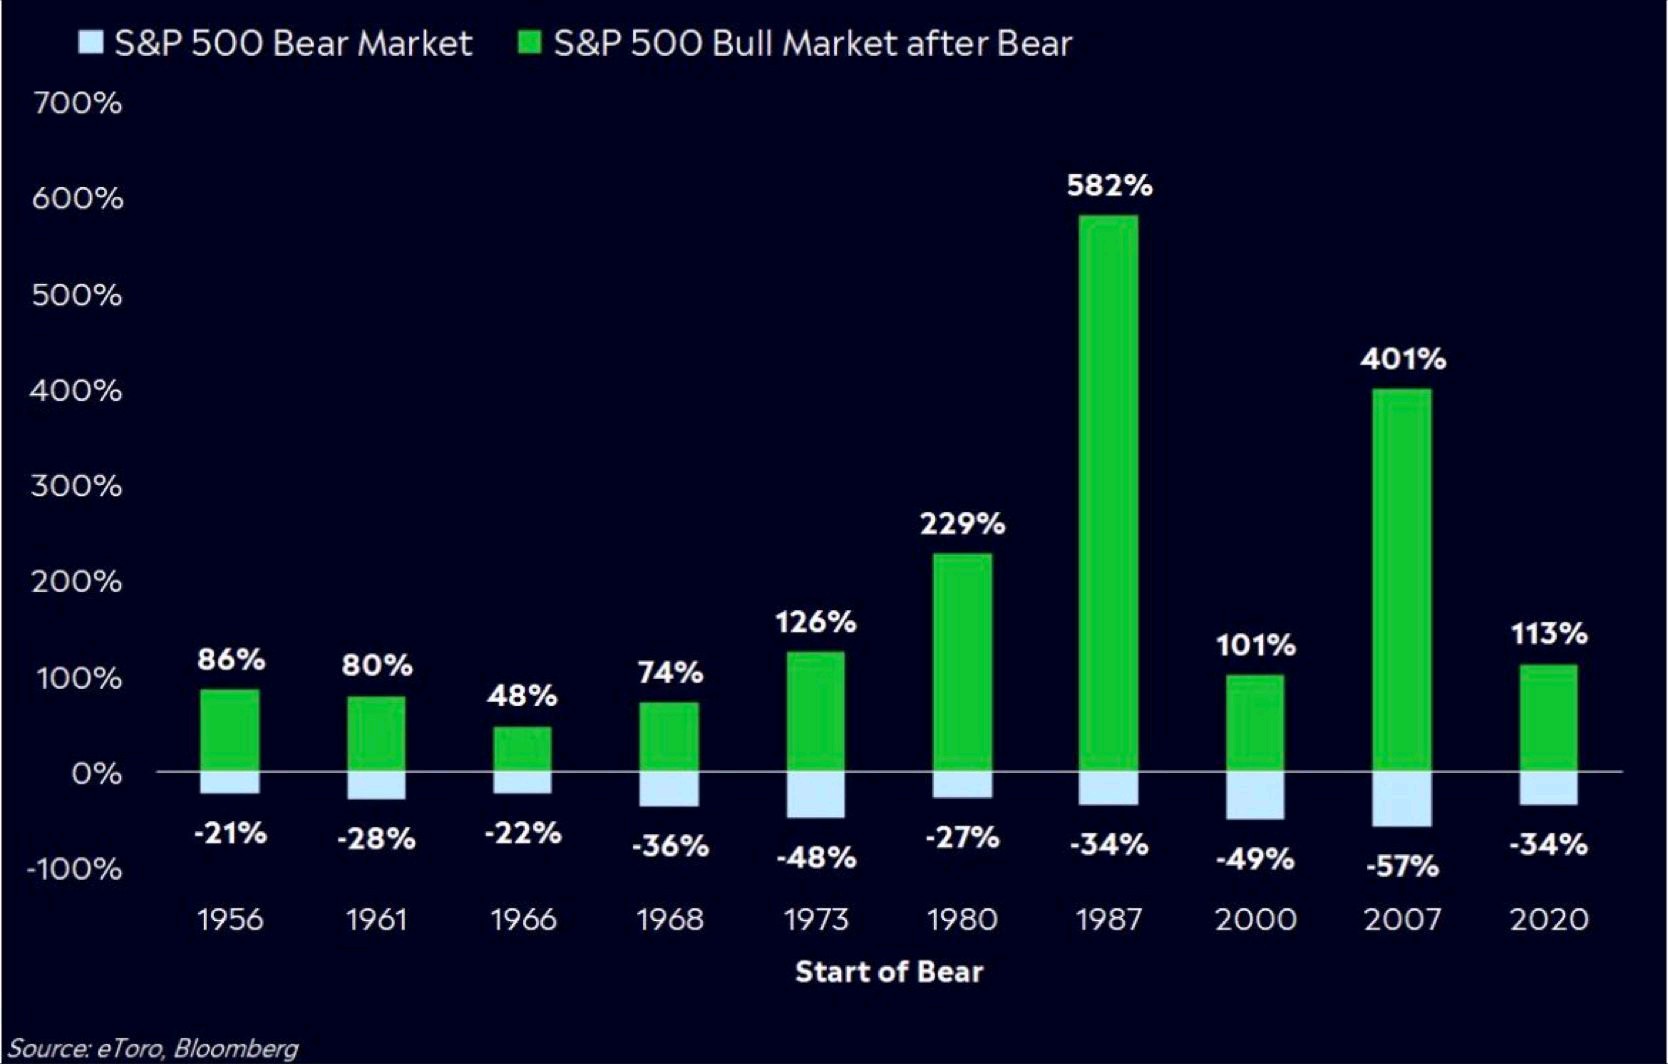 S&P 500 Bear Markets Vs. S&P 500 Subsequent Bull Markets